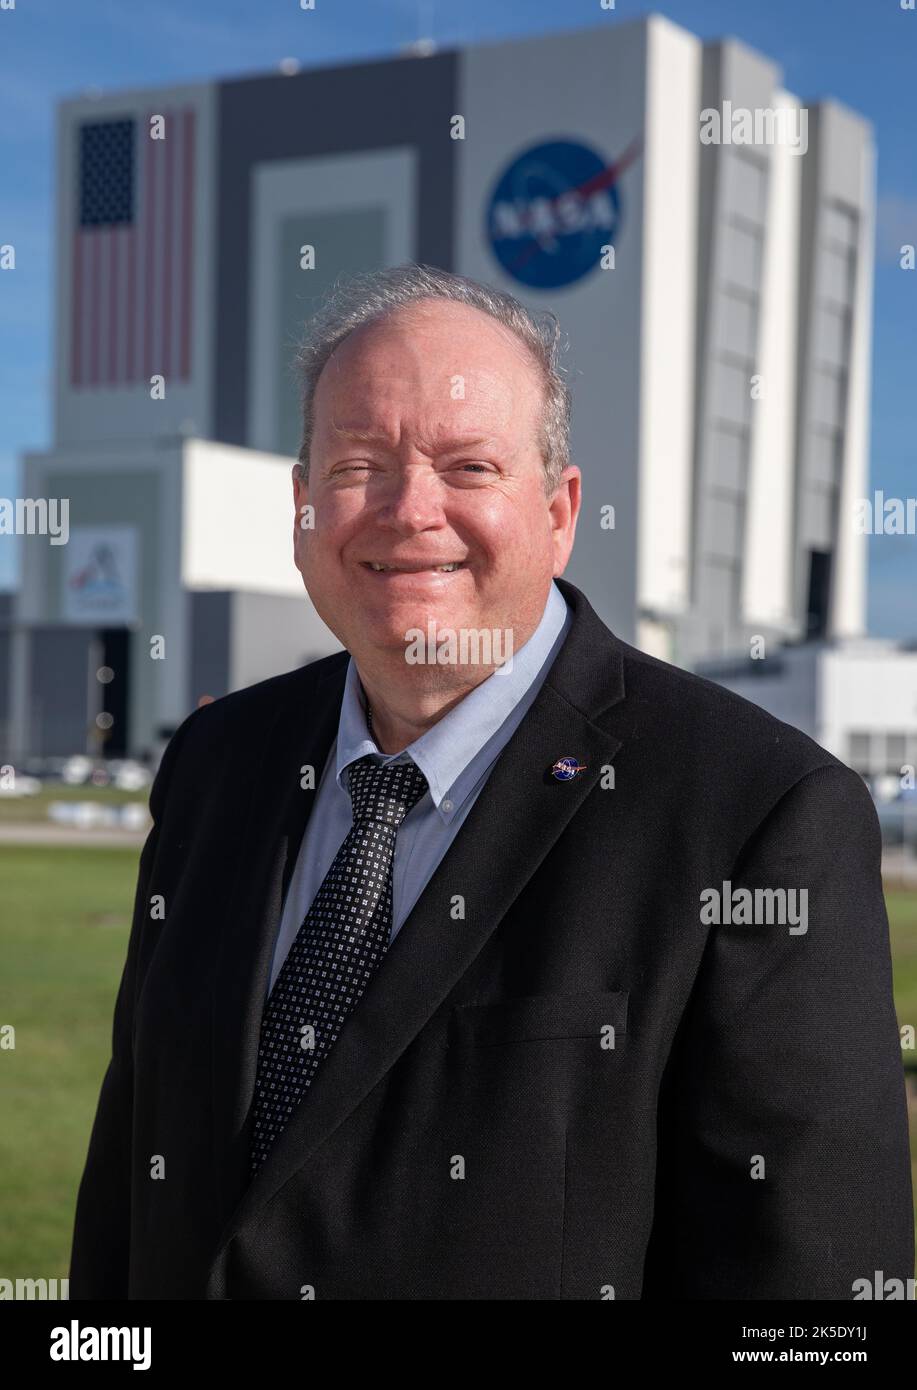 NASA Kennedy Space Center’s Associate Director of Management Burt Summerfield is shown with the Florida spaceport’s Vehicle Assembly Building in the background on June 29, 2022. Summerfield, who began his career at the center in 1982, is responsible for management of Kennedy’s Center Management and Operations (CMO) budget. His duties include executing the center’s strategic analysis, planning, business development, and communications capability that guide key center decisions and relationships. Stock Photo